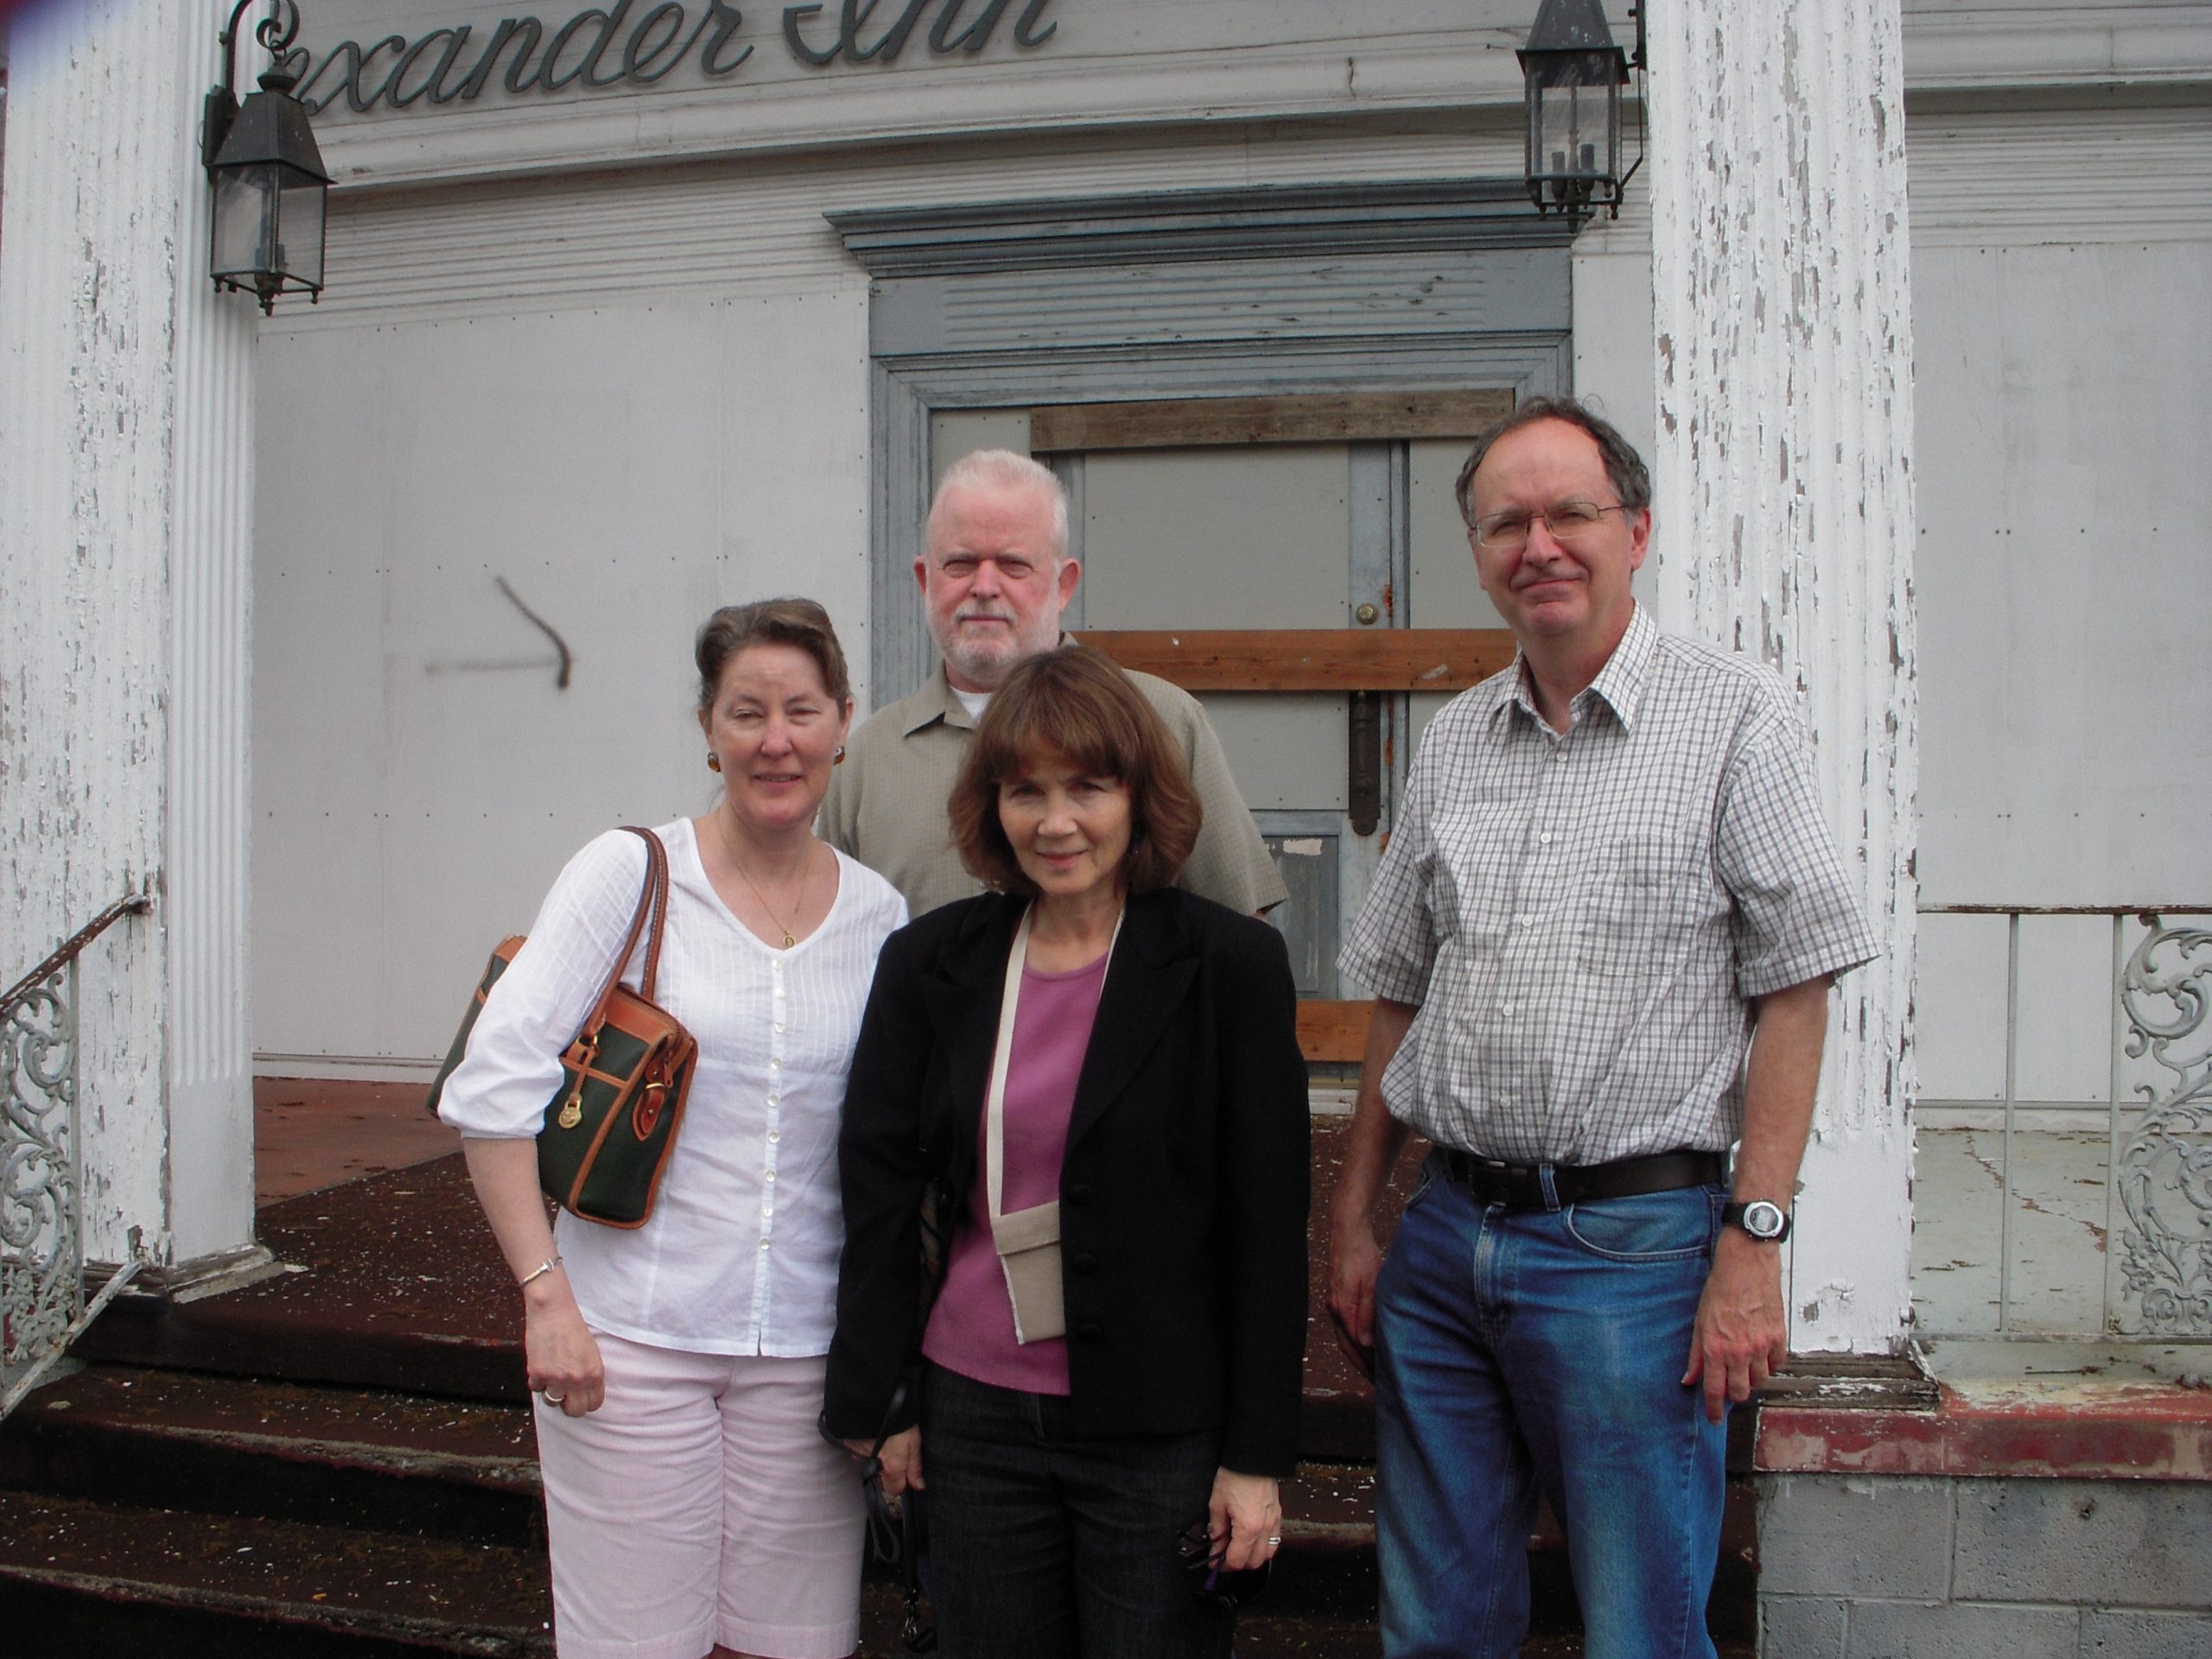 NTHP's Nancy Tinker and Betsy Merritt with DOE's Skip Gosling and Terry Fehner in front of the Alexander Inn at Oak Ridge